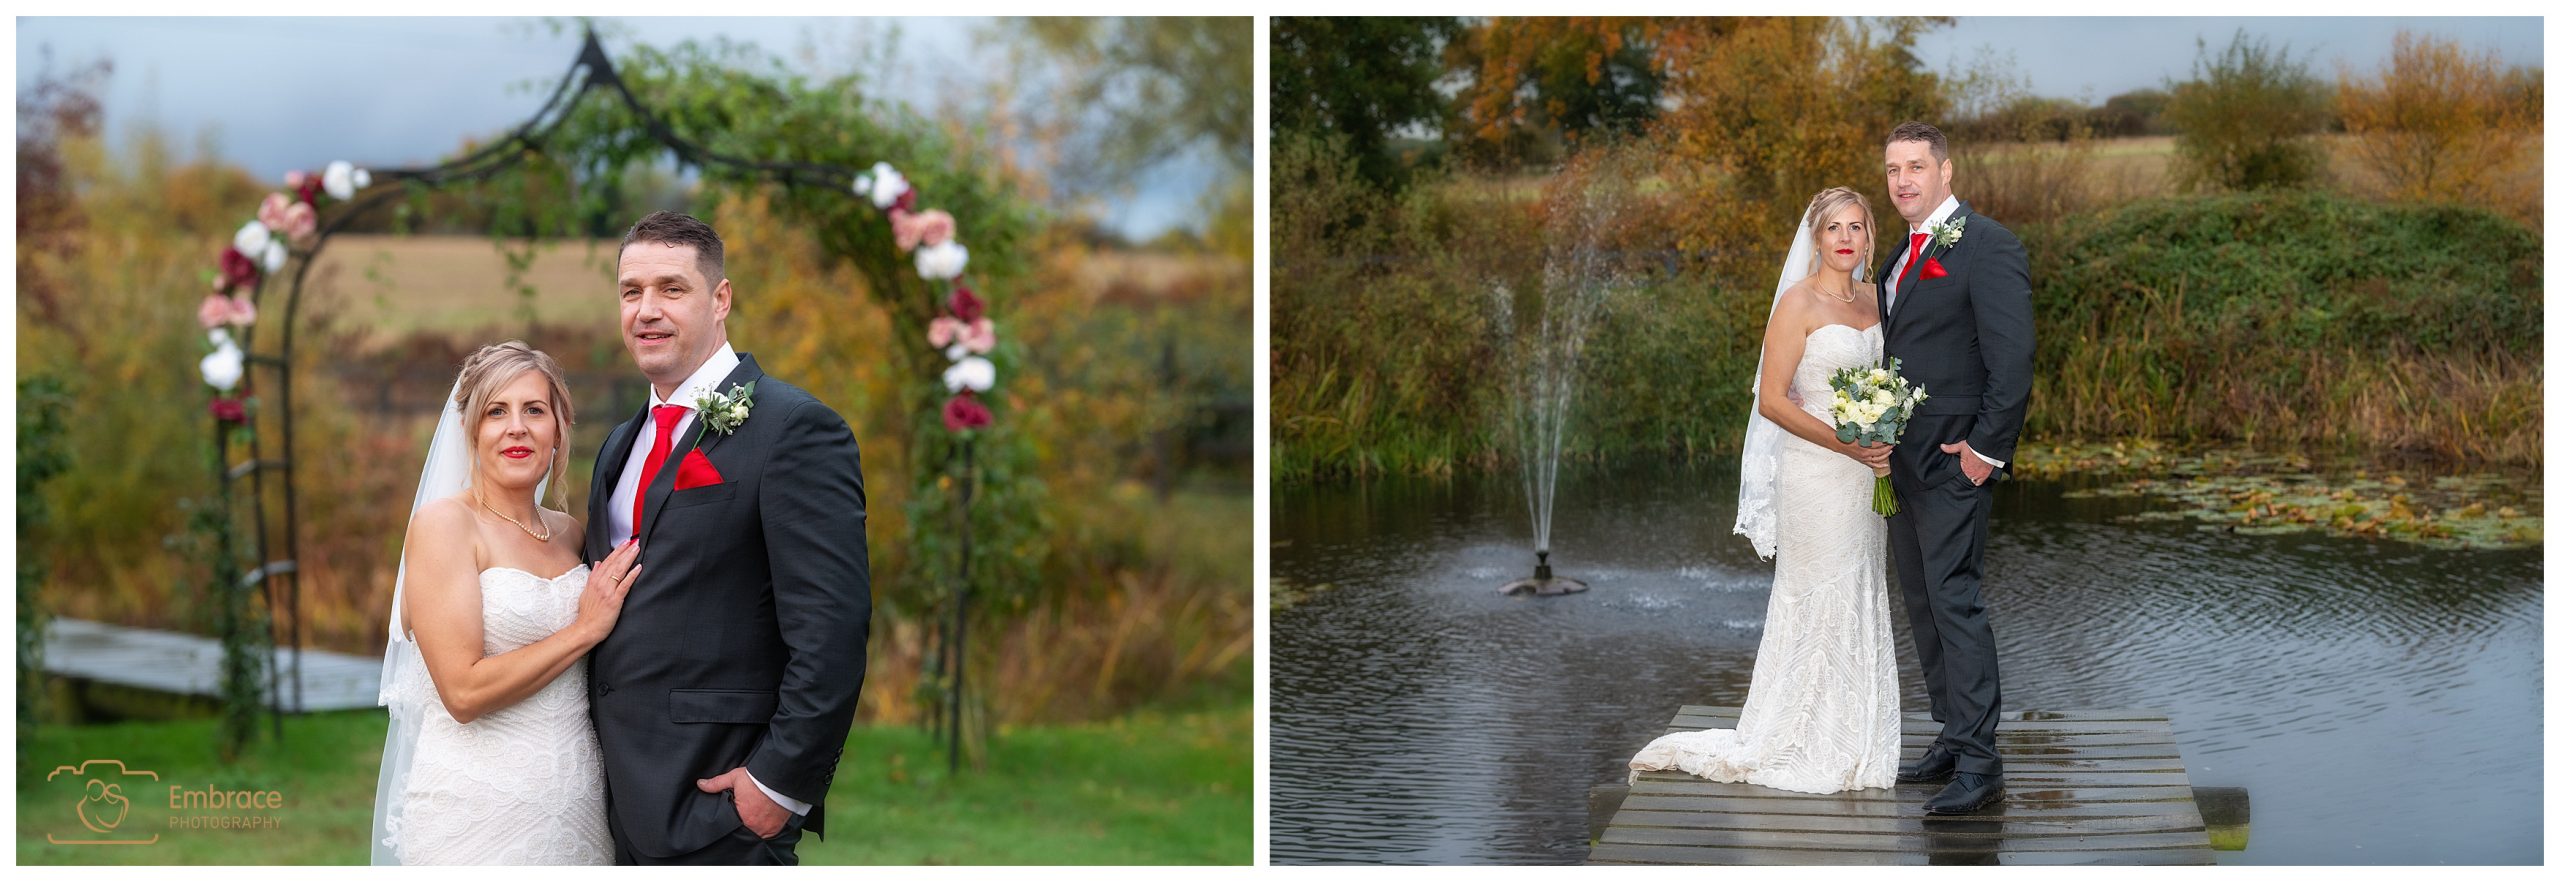 Bride and groom photographs on the jetty by the pond at White Dove Barn